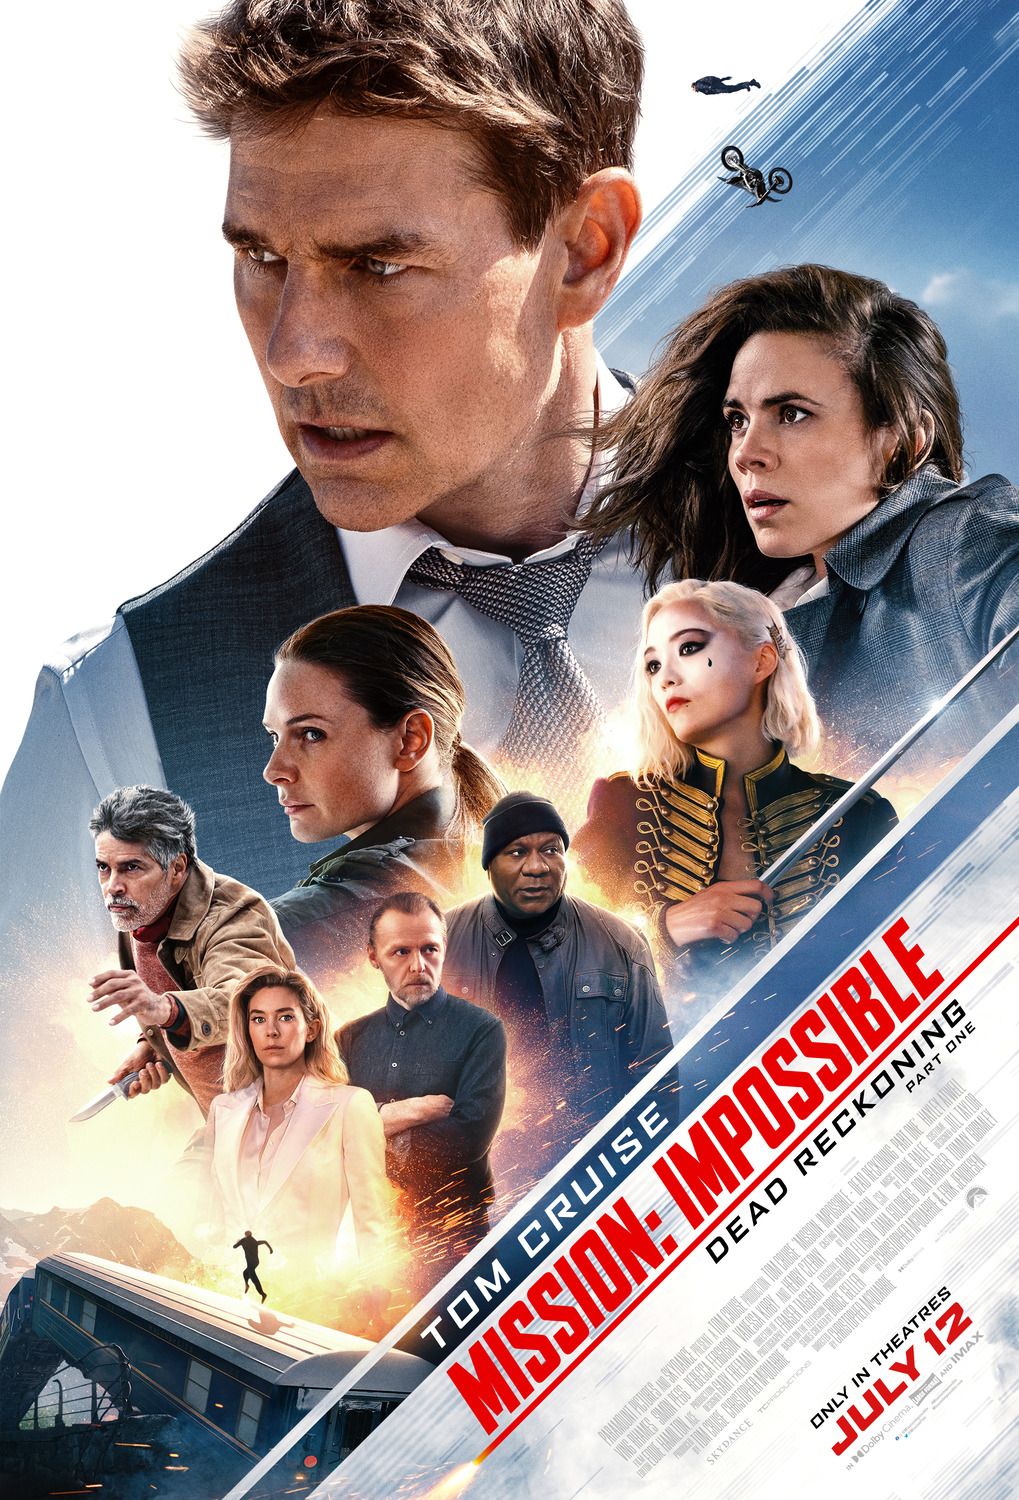 The poster for Mission: Impossible - Dead Reckoning, Part One.